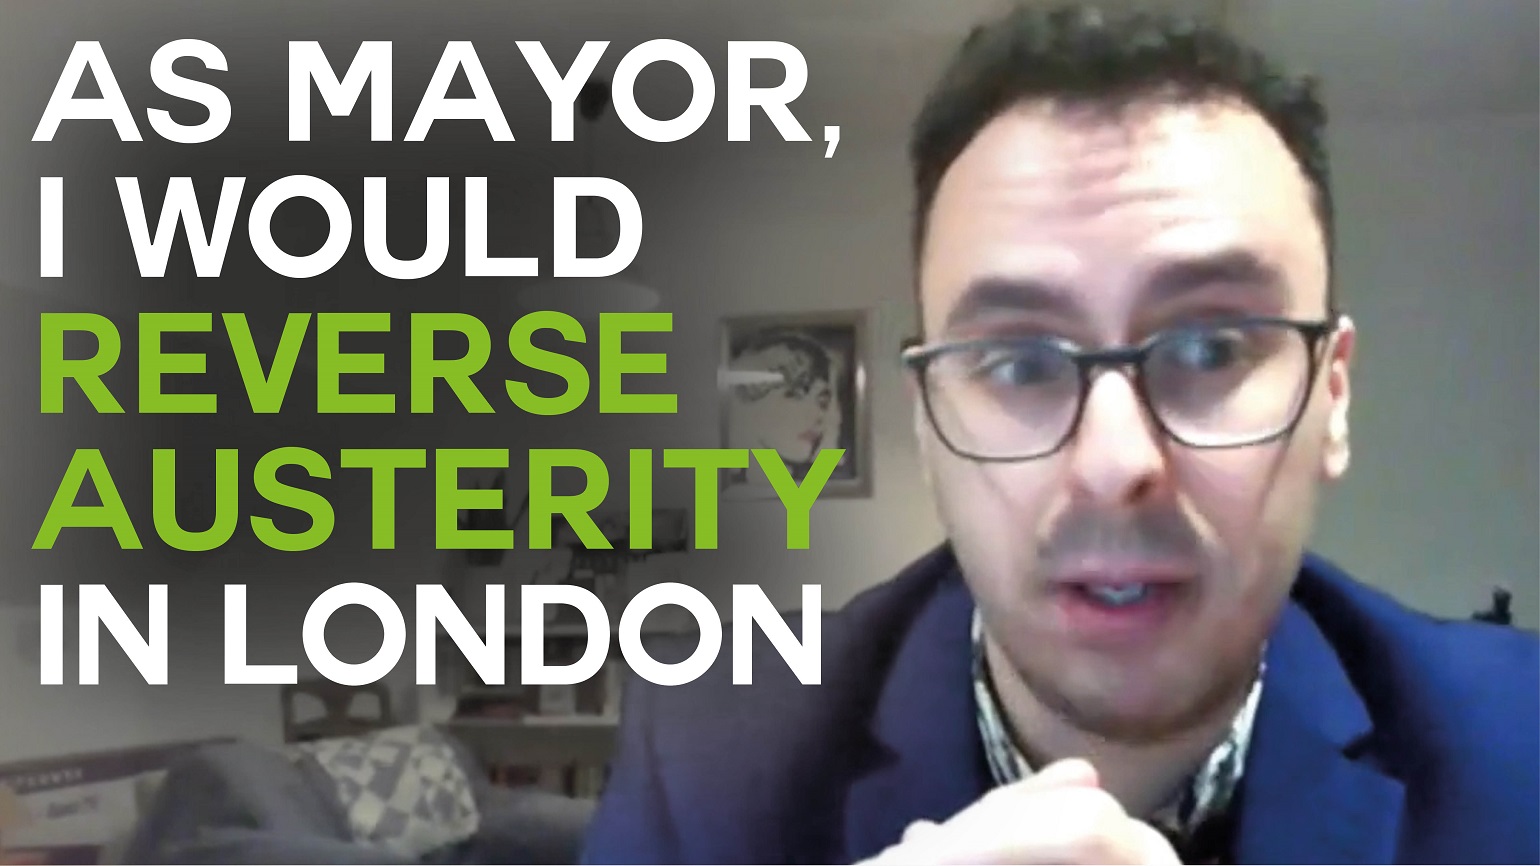 A still of an interview with Benali Hamdache with text overlaid reading "As Mayor I would reverse austerity in London"